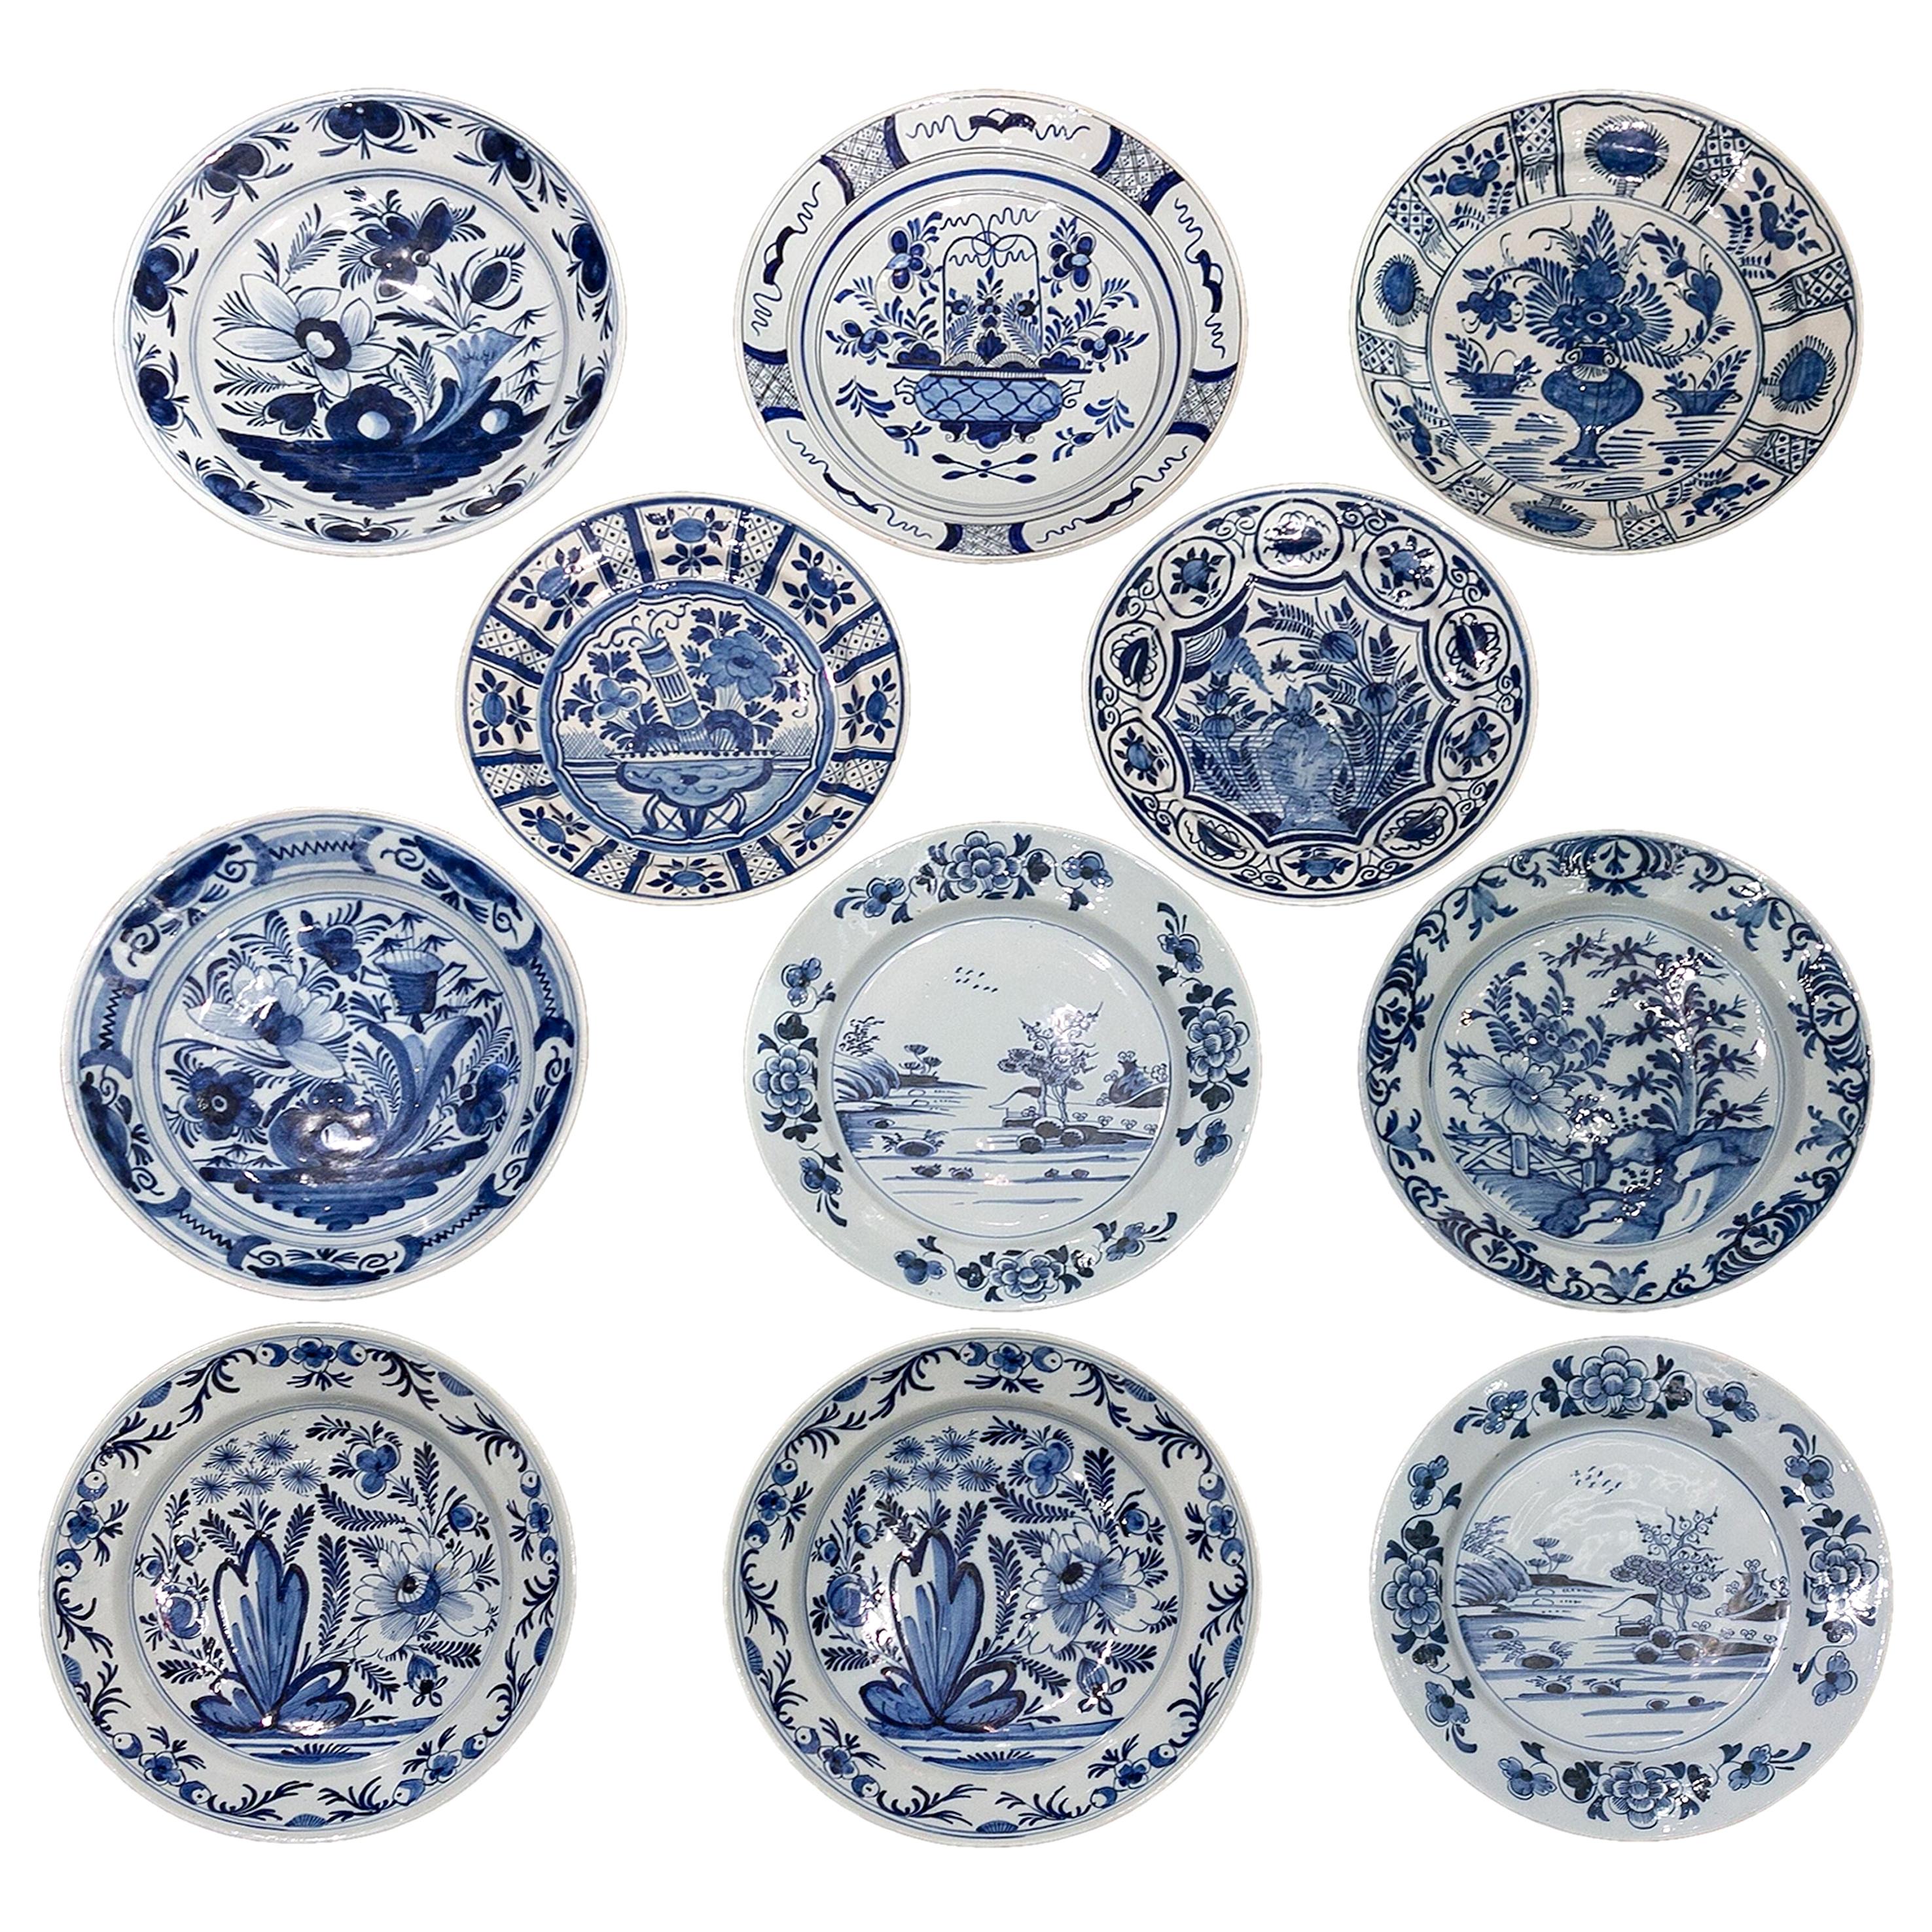 Eleven Antique Large Delft Blue and White Chargers, Late 18th Century